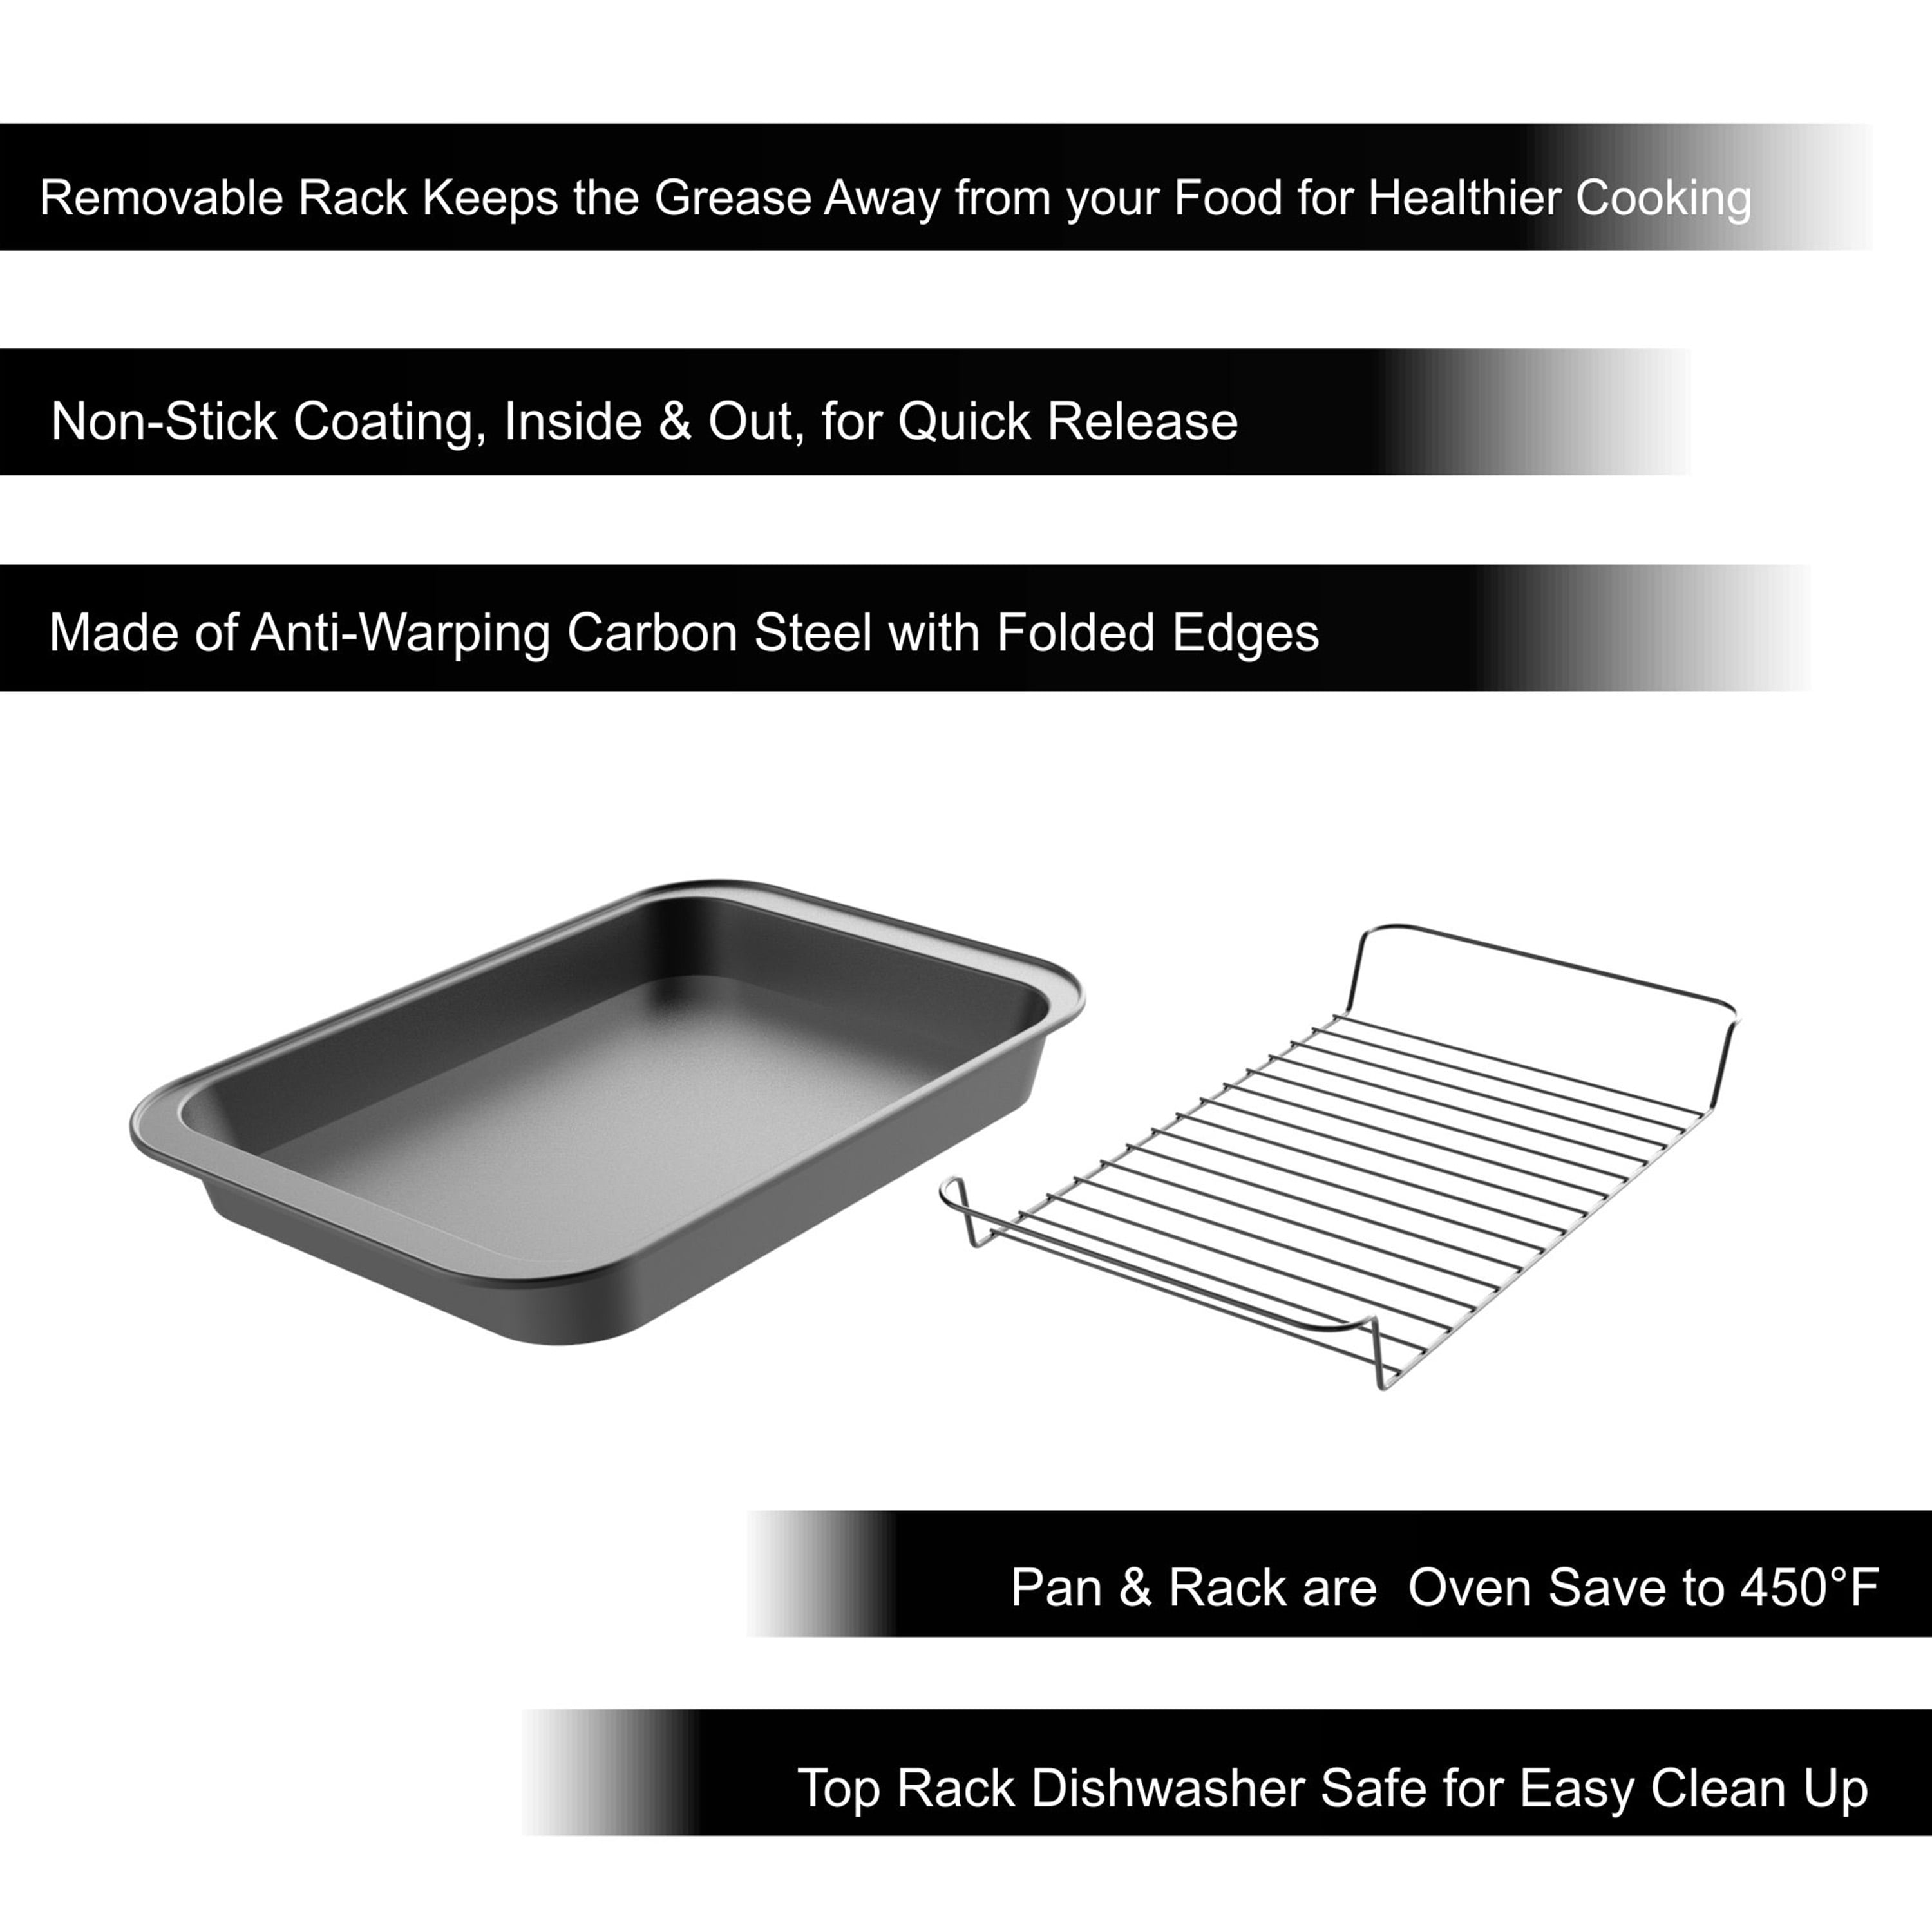 Do you have to grease disposable baking pans? - Technobake